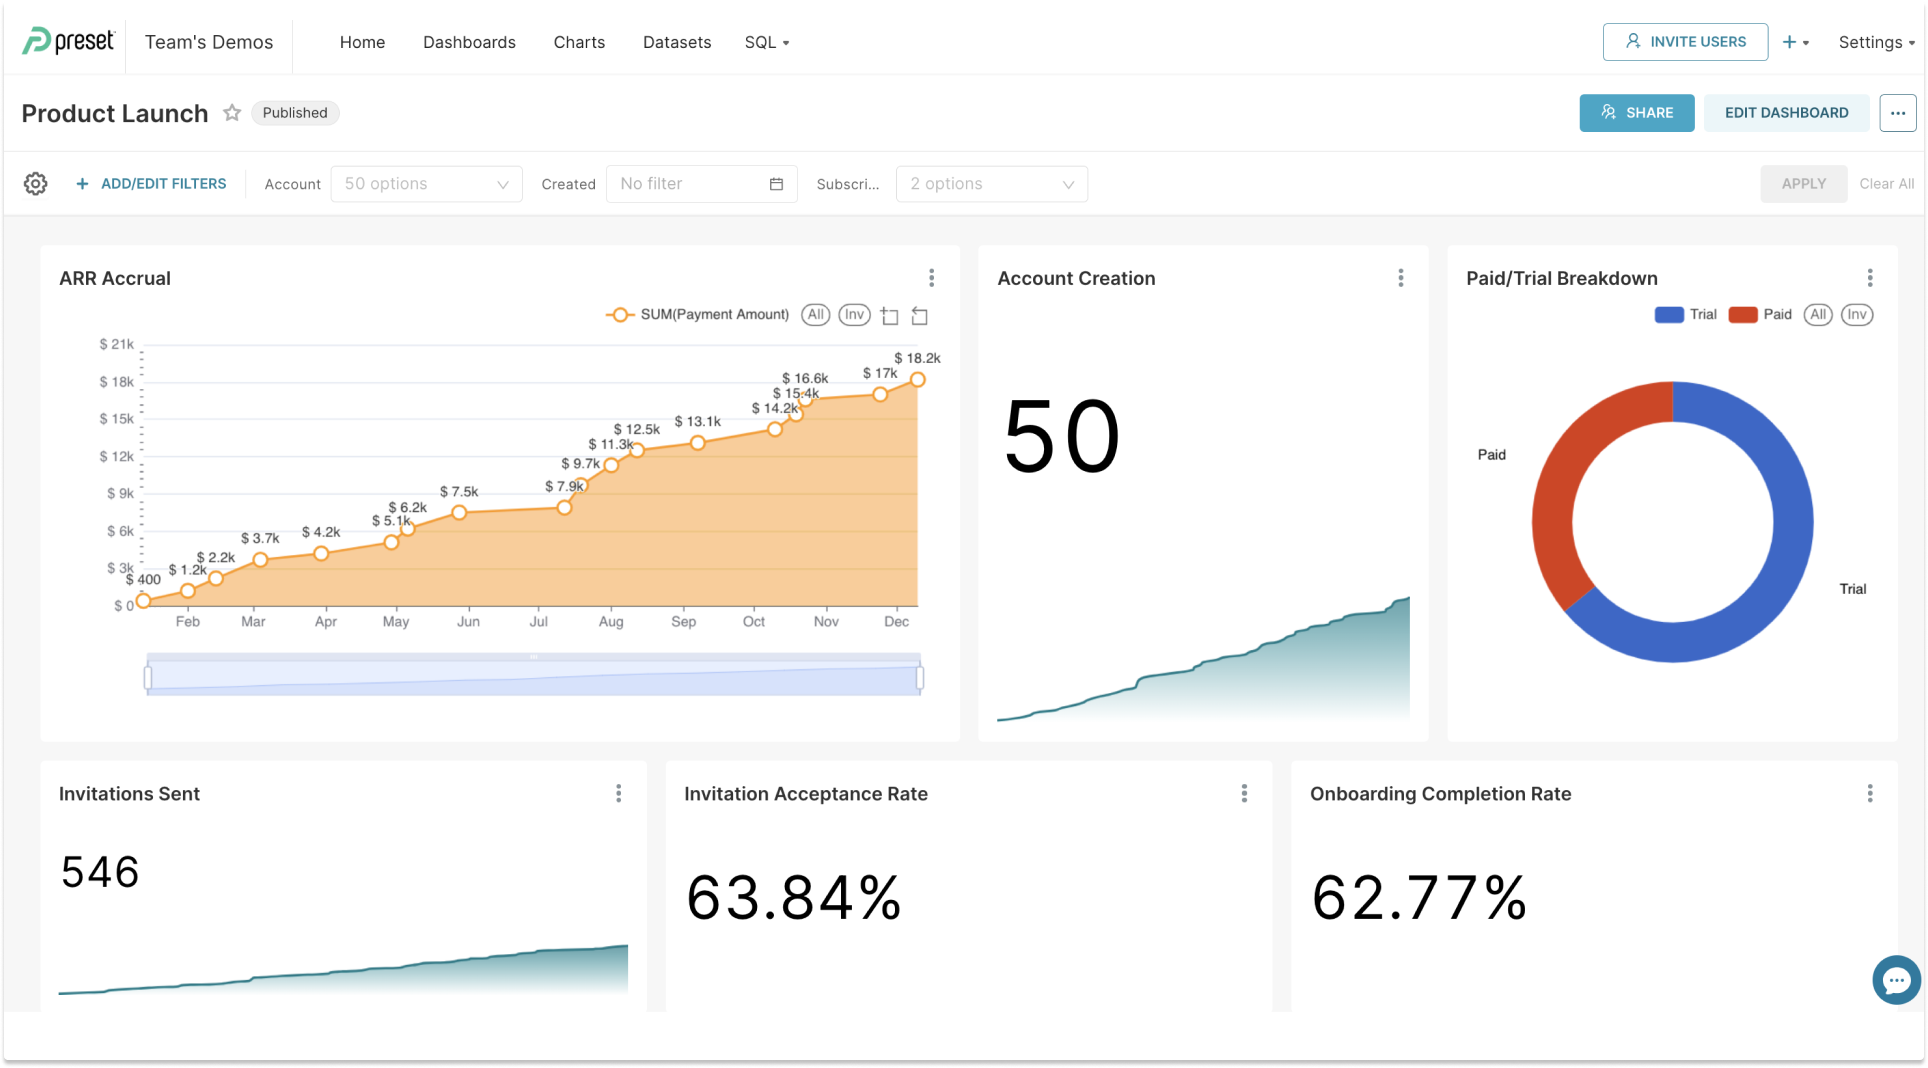 Product Lunch Dashboard